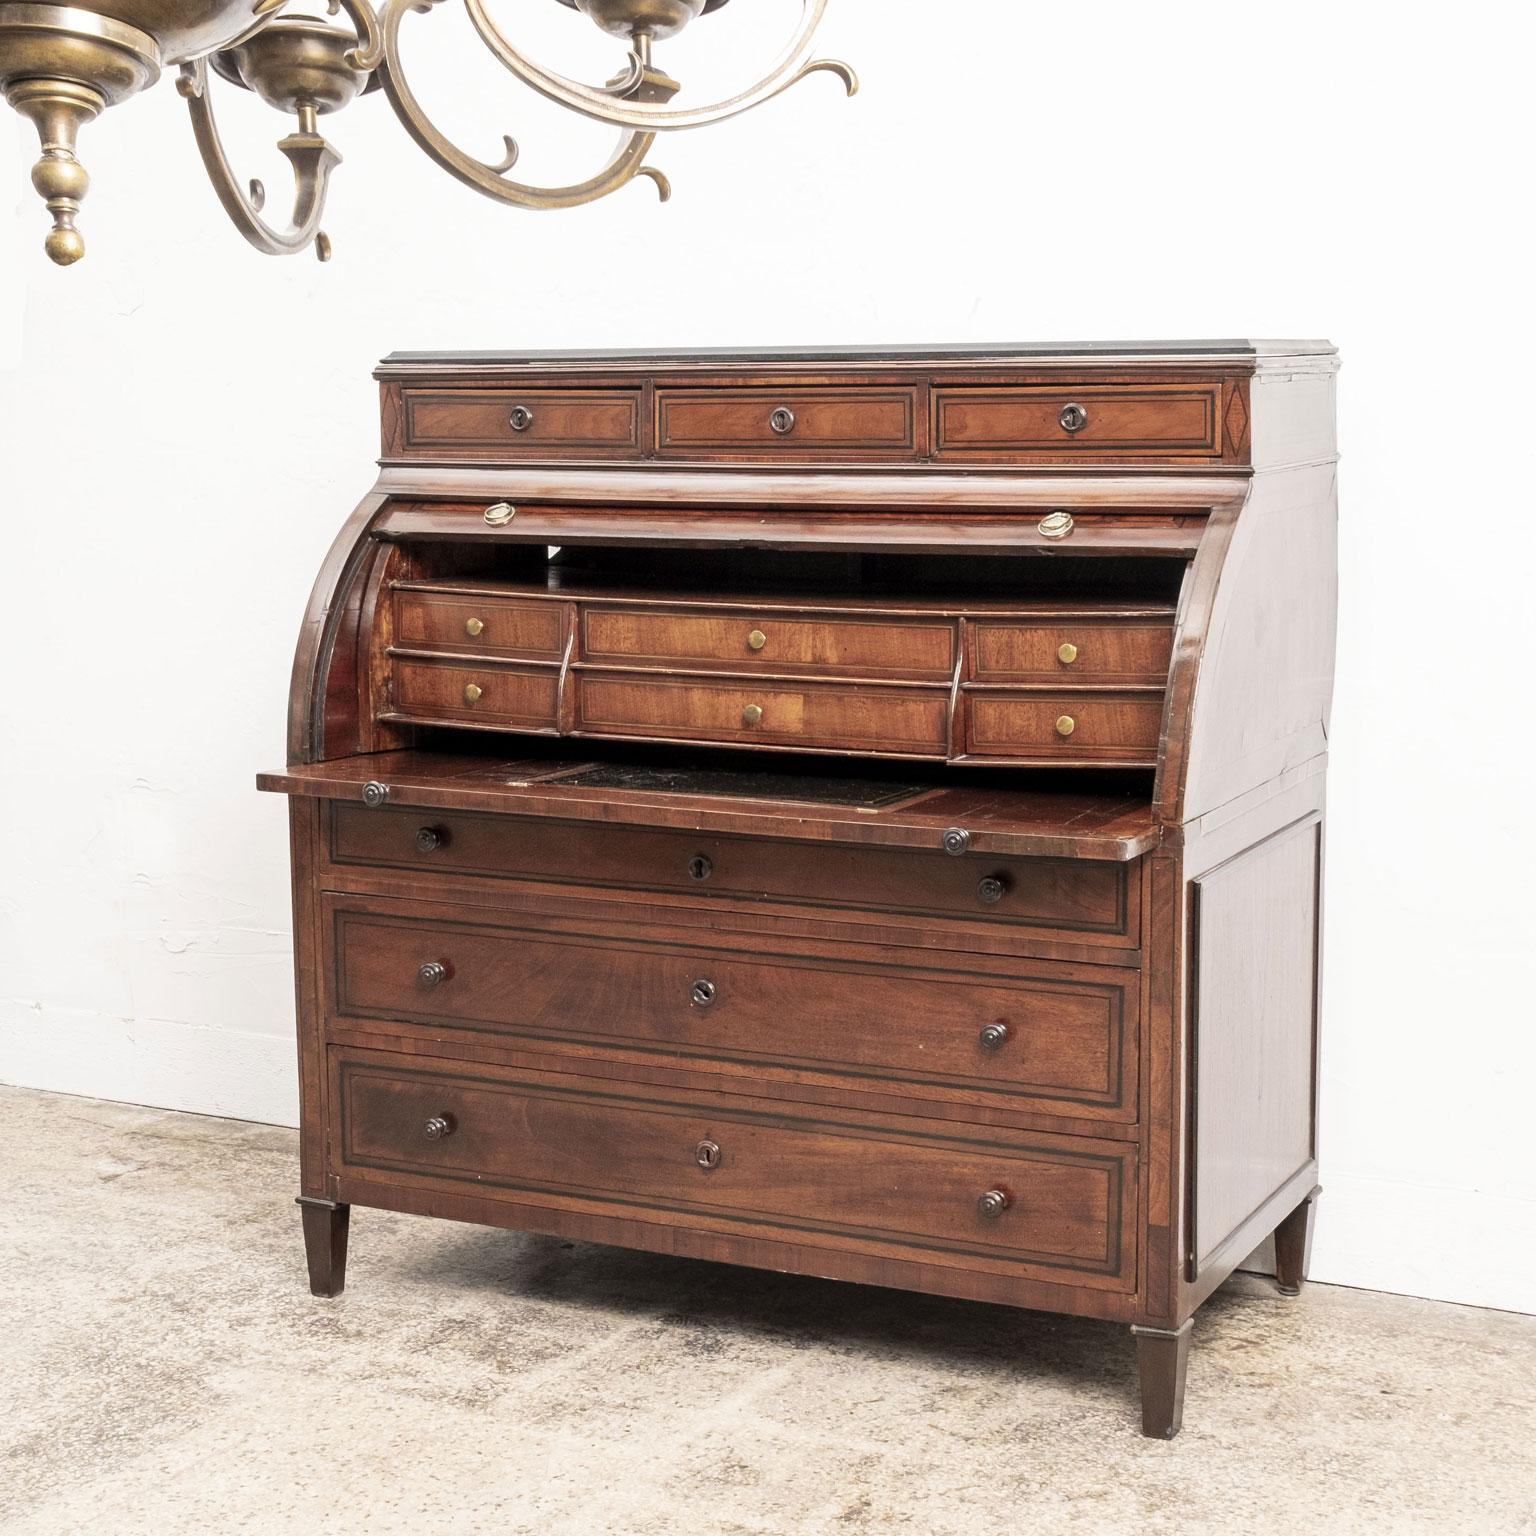 Neoclassical English mahogany secretary, circa 1820-1840, with roll-top and ebonized inlay. Secondary woods are English oak and fruitwood. Roll-top pulls are gilded brass and all other exterior pulls turned wood. Interior pulls are brass. Gilded